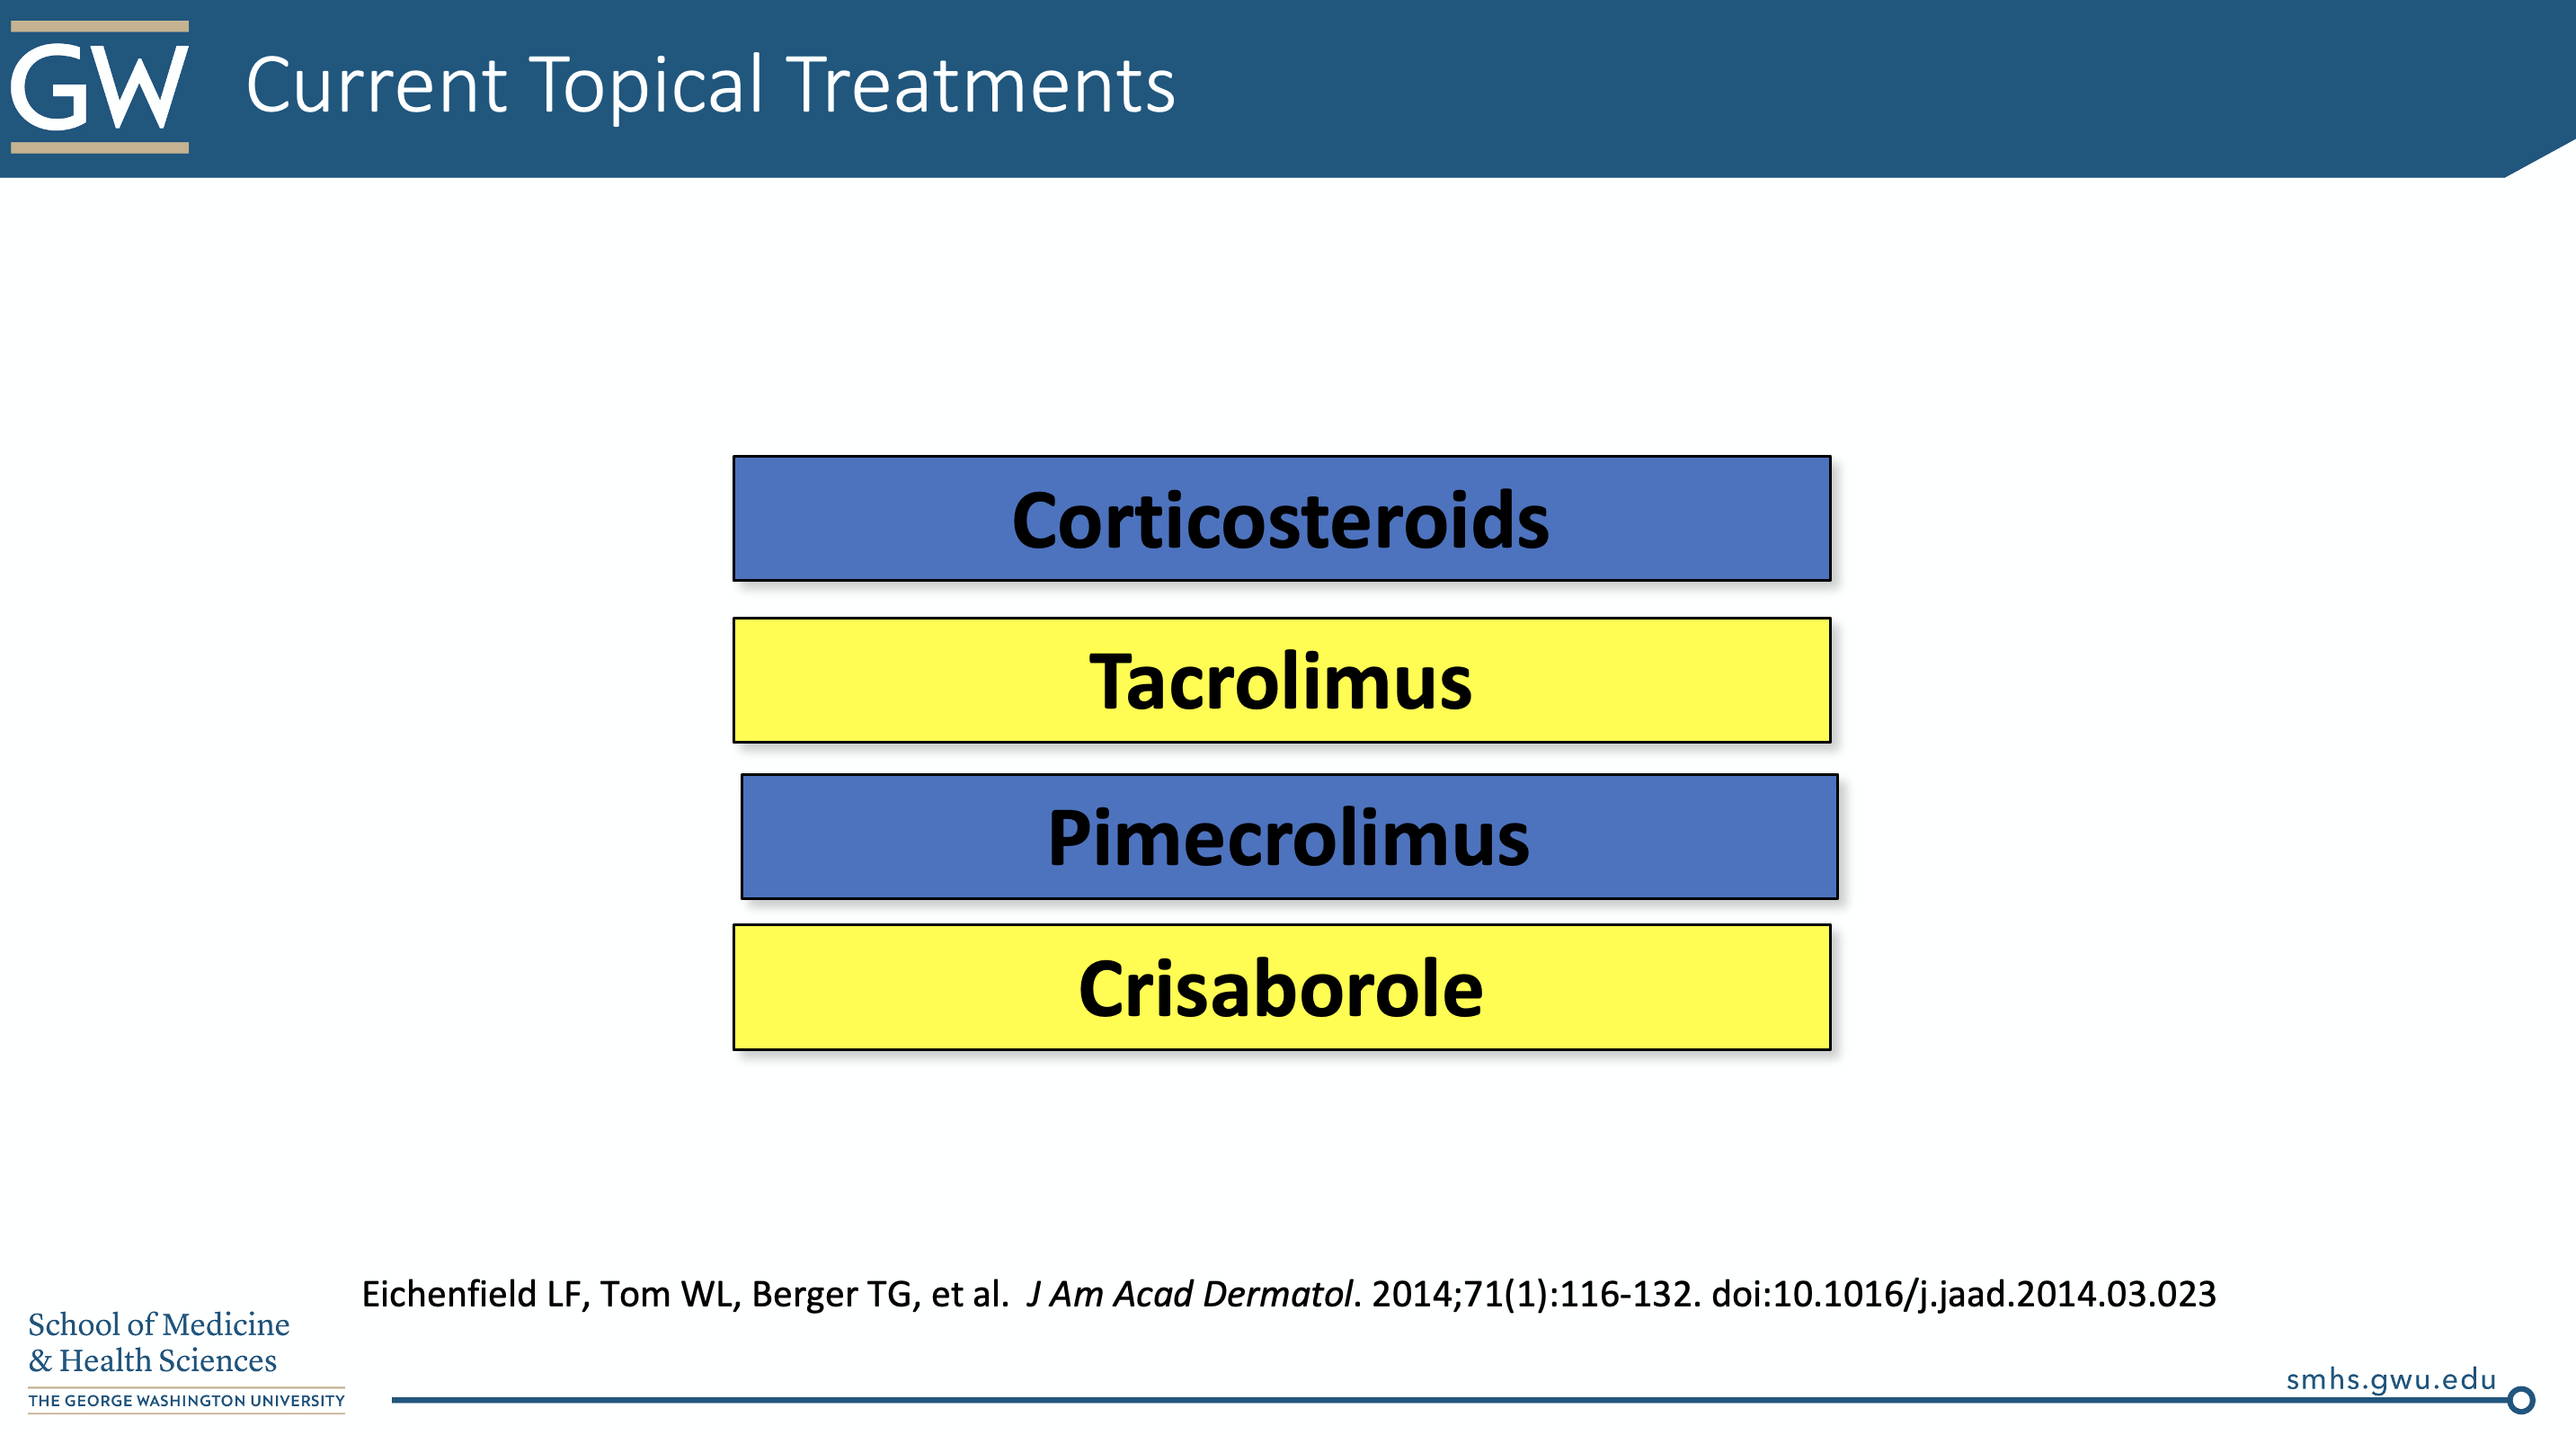 Current topical therapies for atopic dermatitis